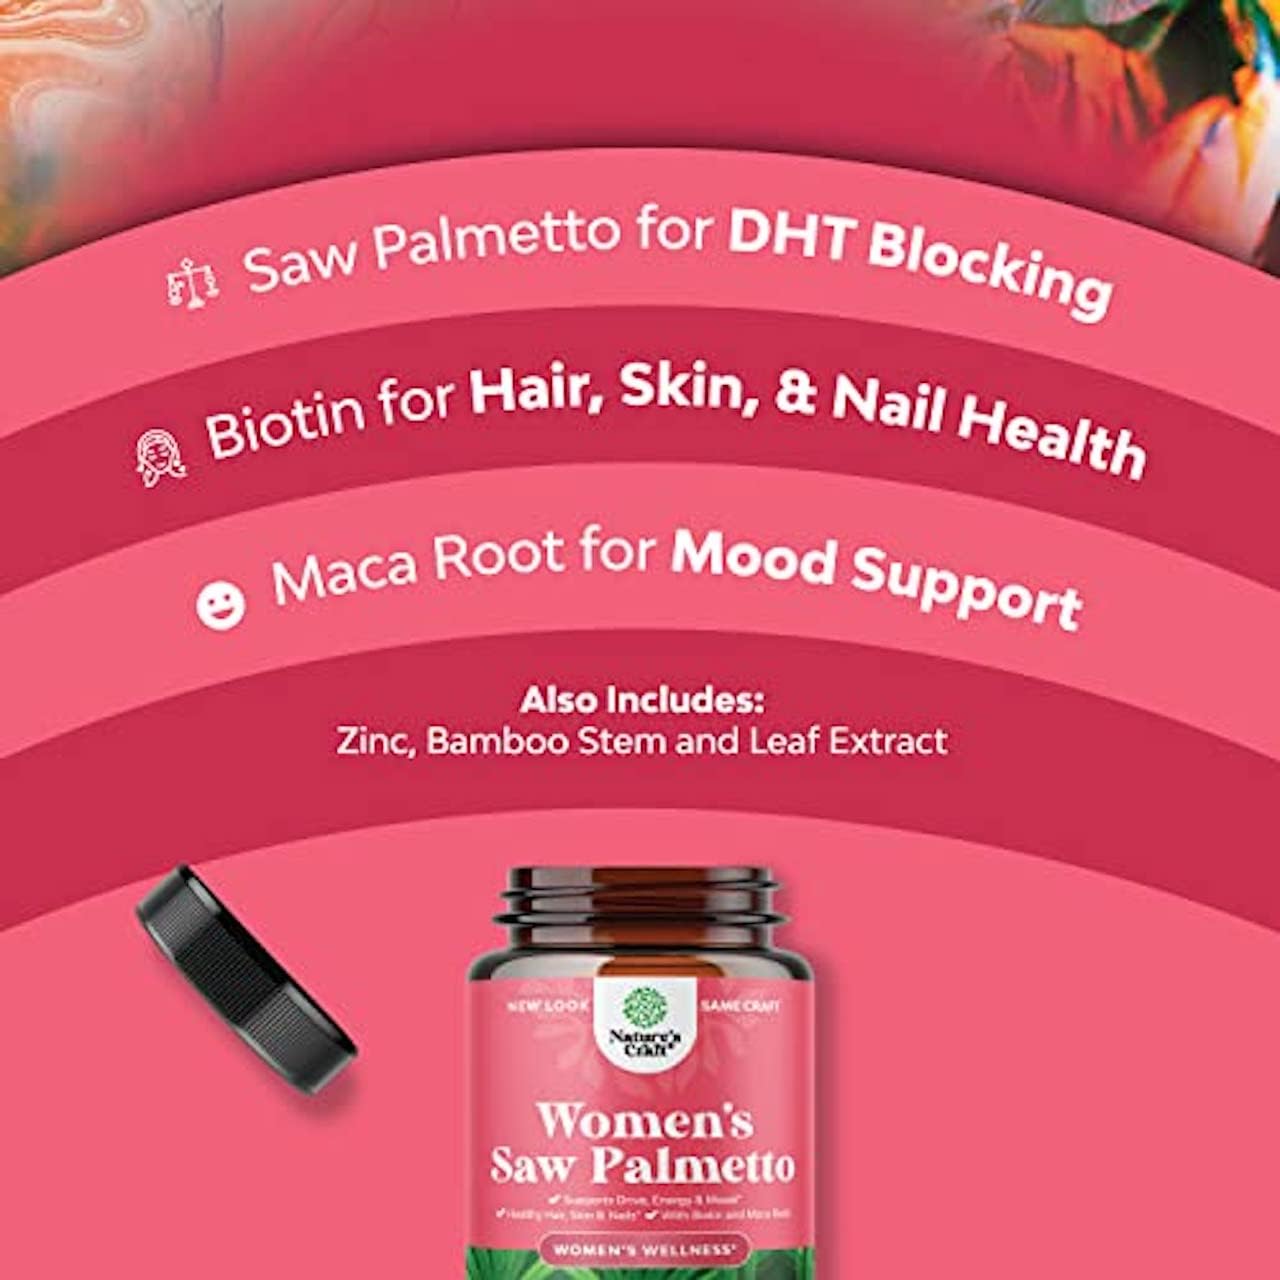 Natures Craft Bundle of Herbal Menopause Supplement and Extra Strength Saw Palmetto for Women - Perfect for Estrogen Balance - DHT Blocker Thickening Hair Vitamins for Hair Loss for Women